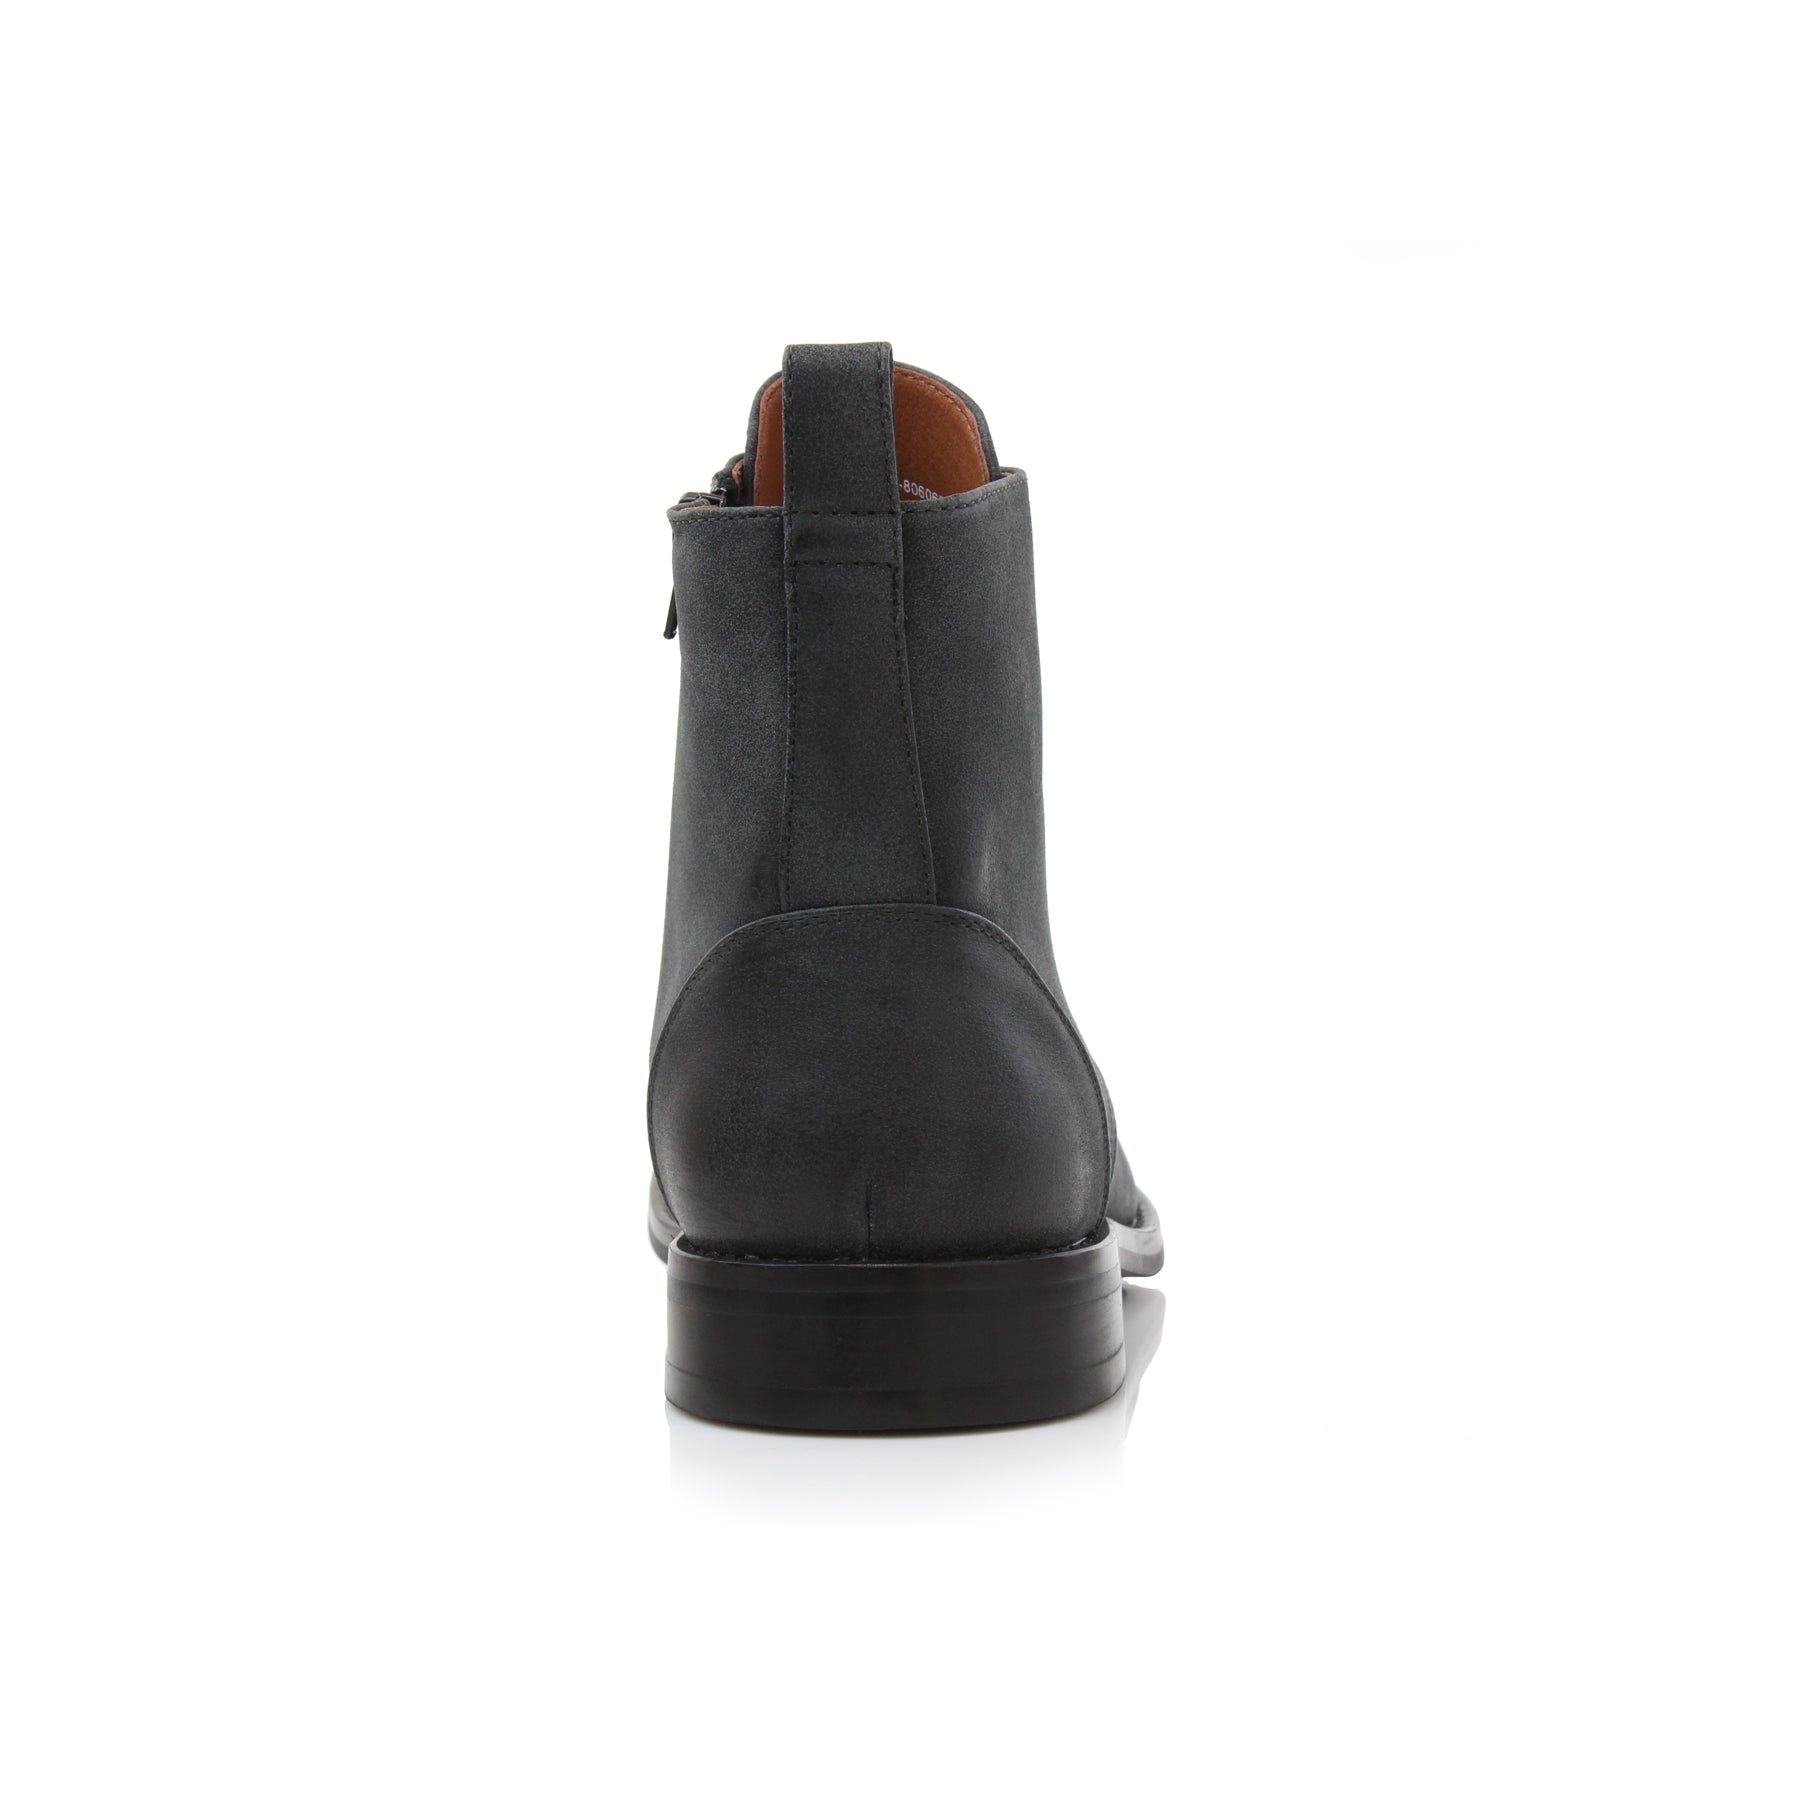 Leather Ankle Boots | Duke by Polar Fox | Conal Footwear | Back Angle View